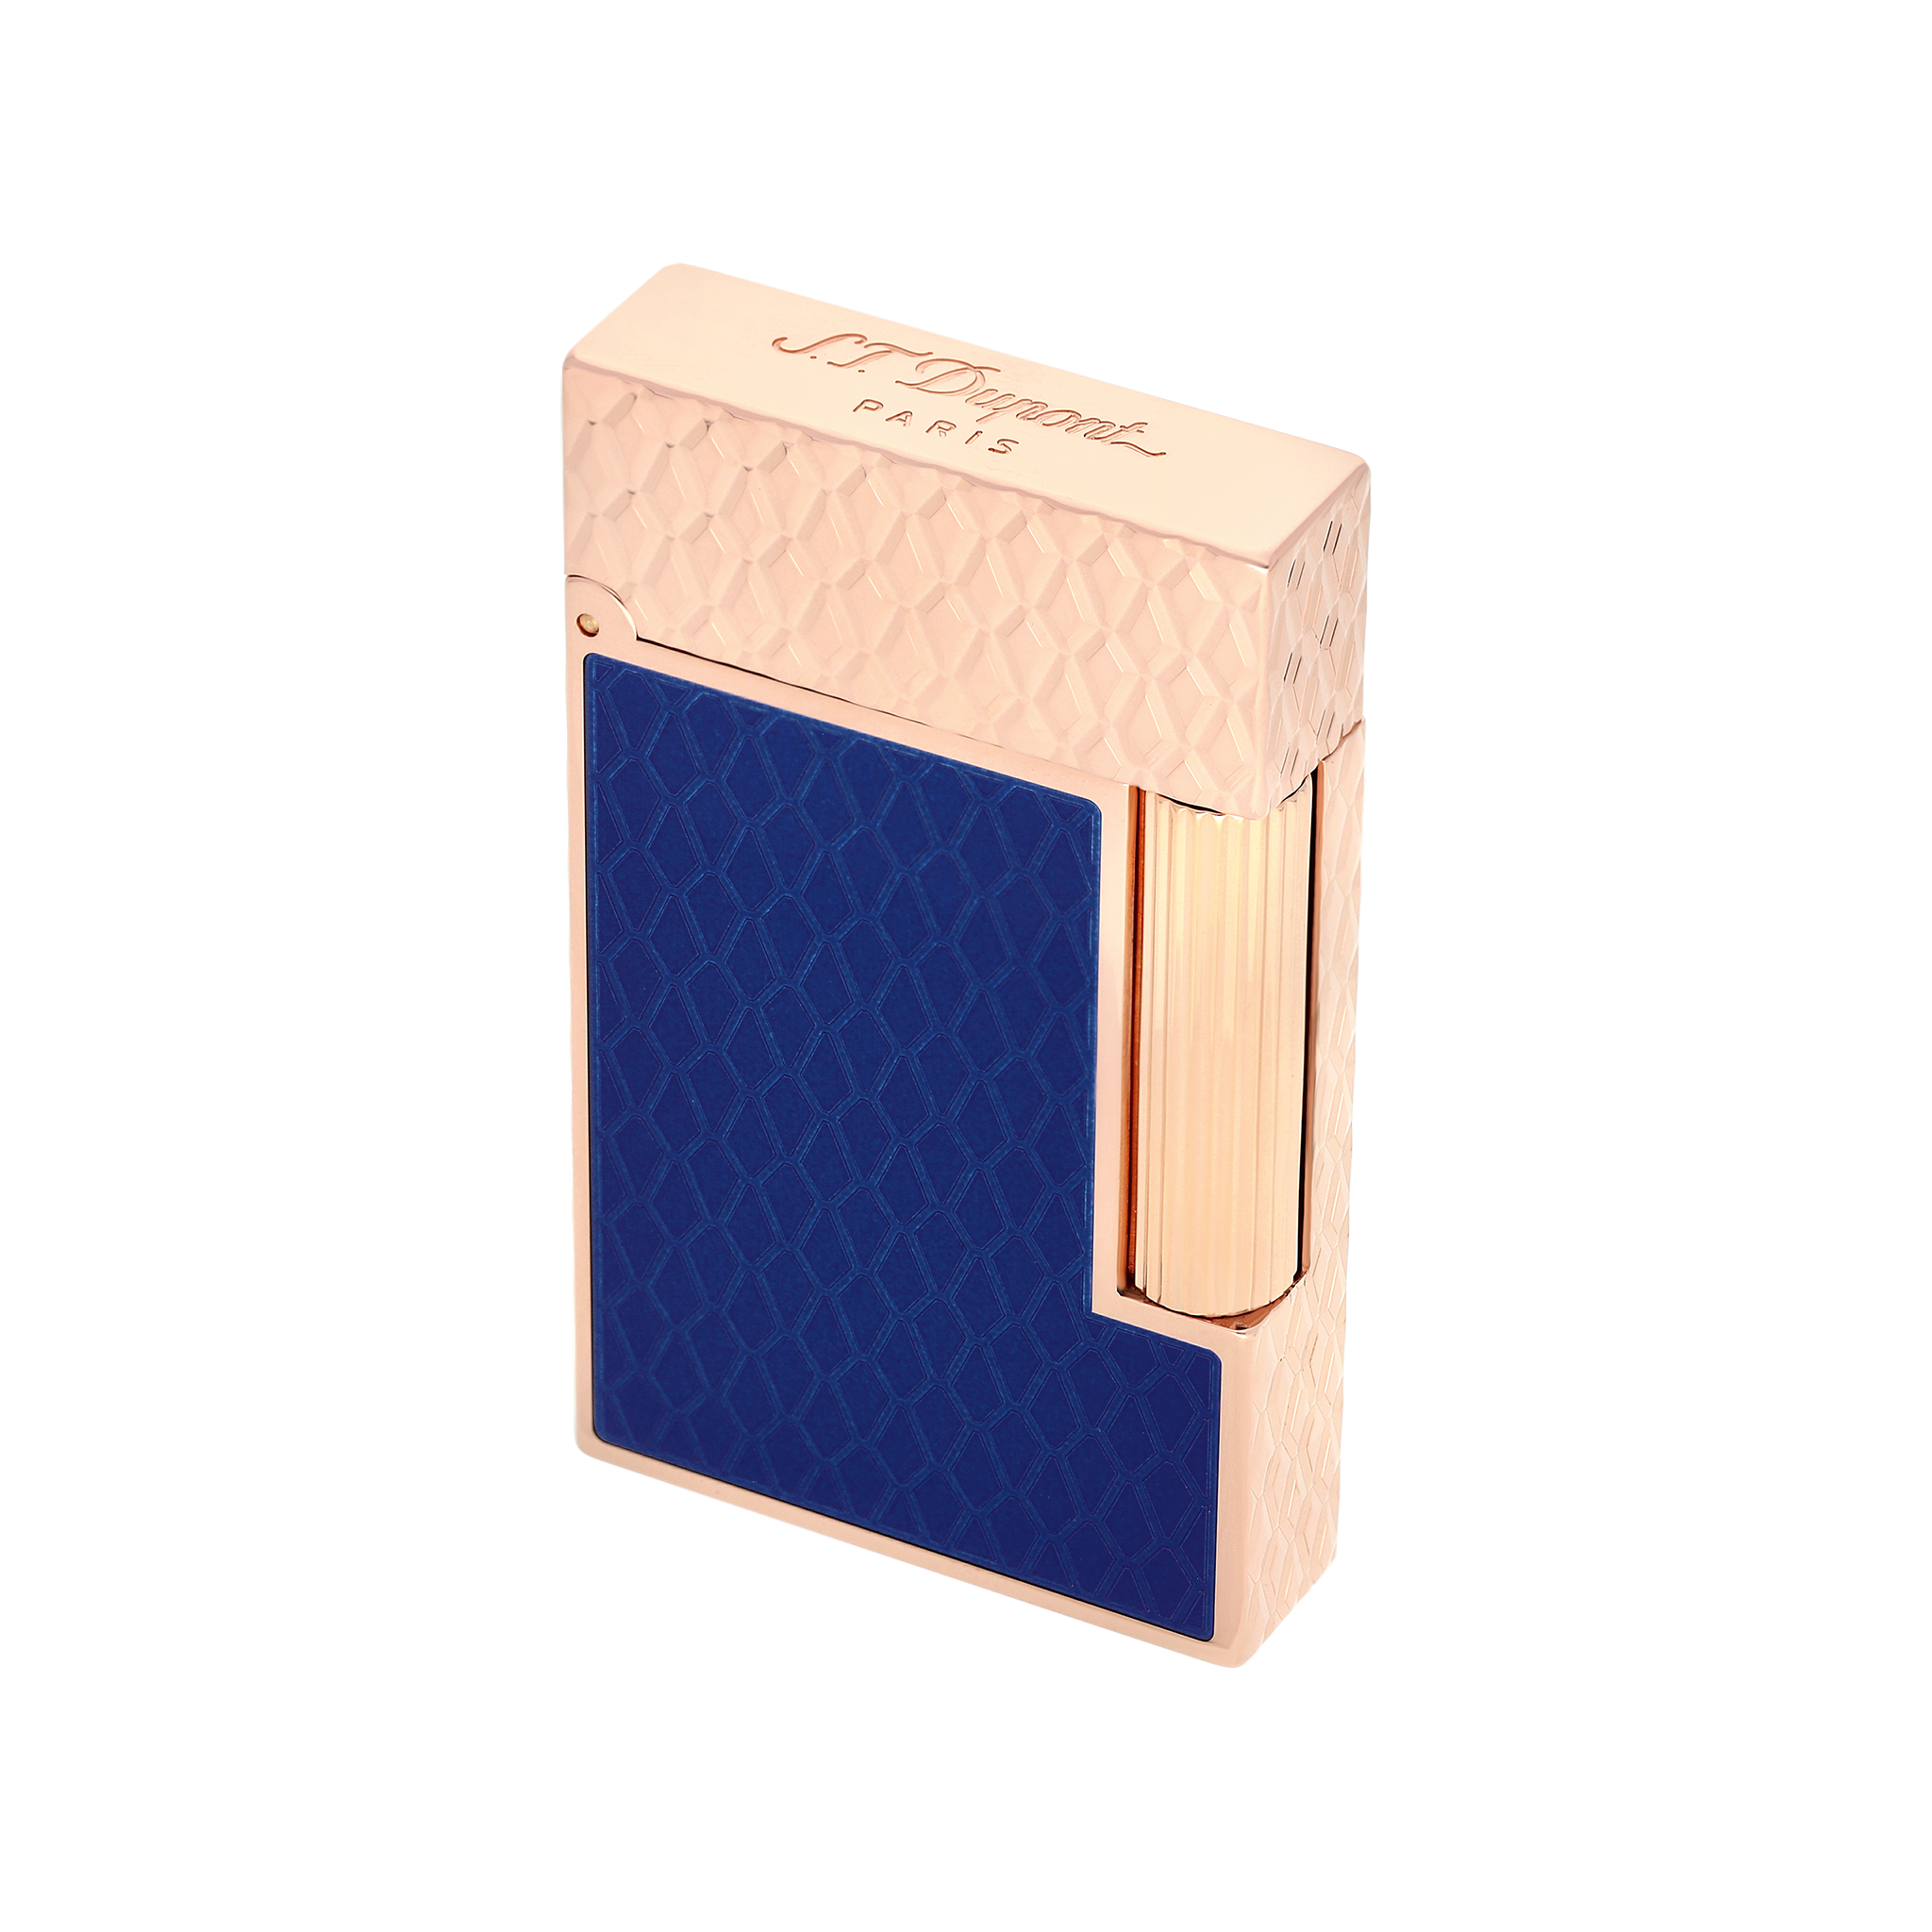 DUPONT | – - under Guilloche lacquer pink line 2 Ligne blue/ lacquer/ luxury gold lighters S.T. Bright